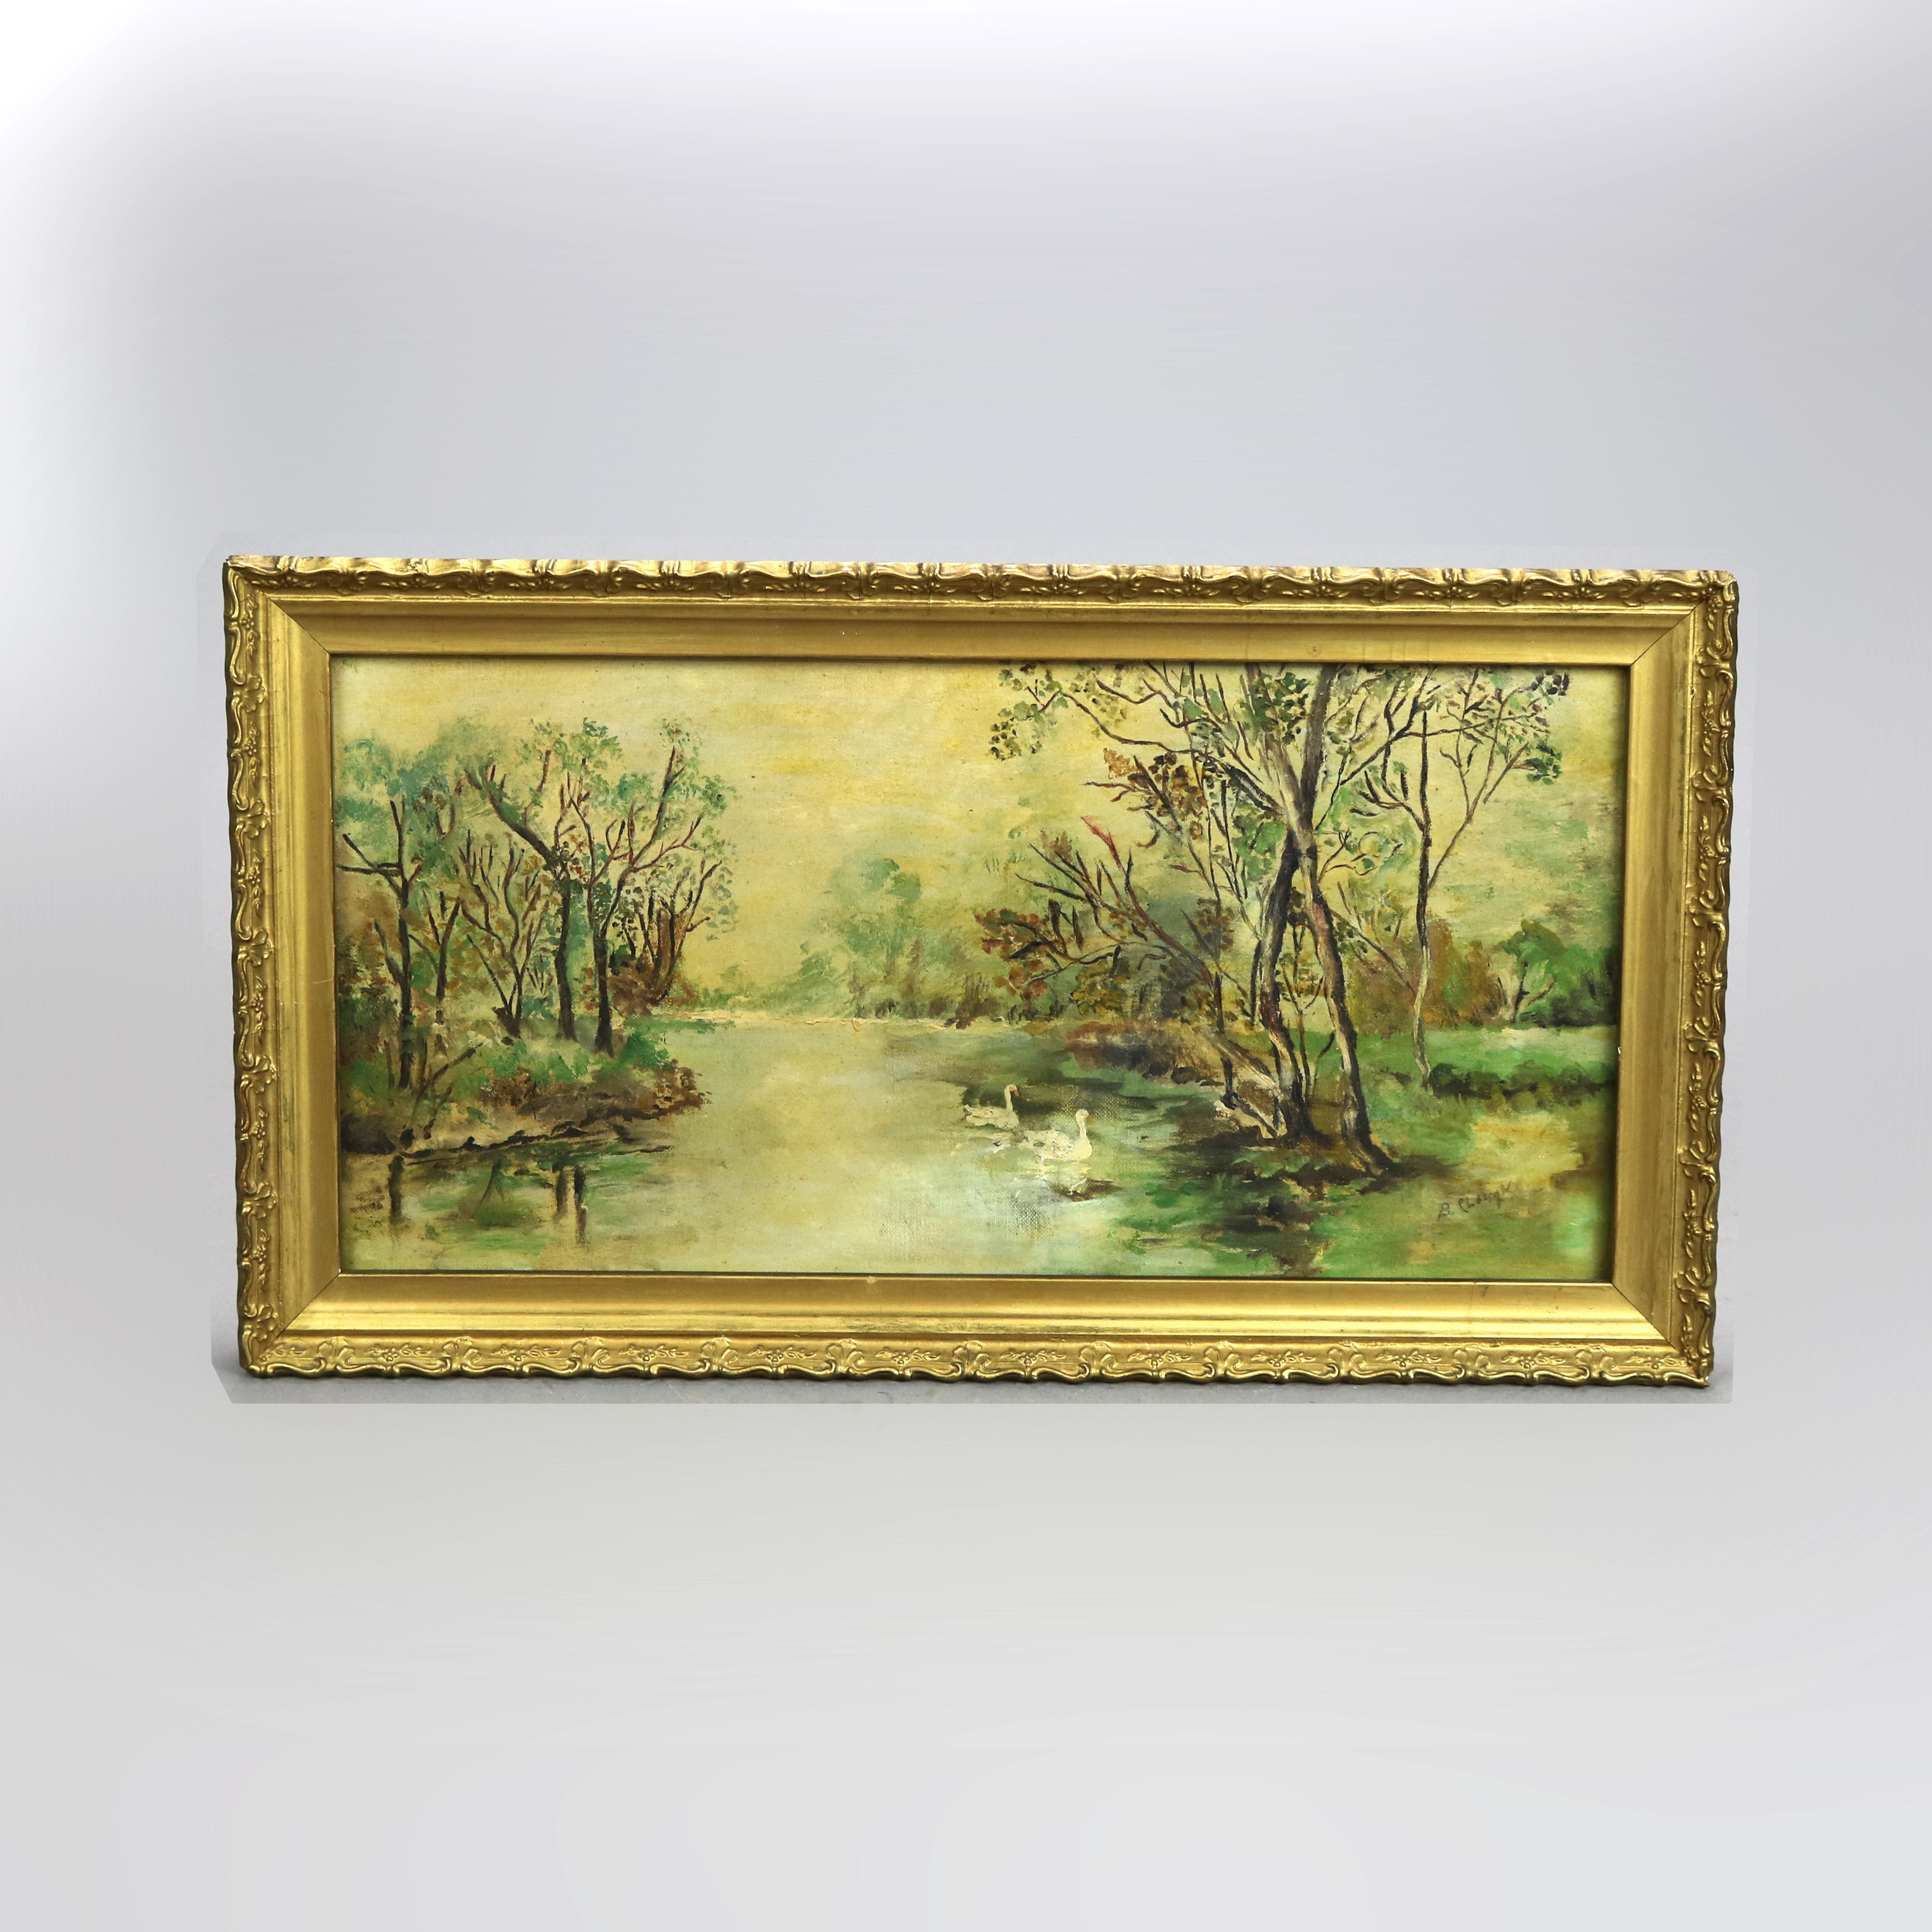 Hand-Painted Antique Landscape Painting of River Signed Plough, c1880’s